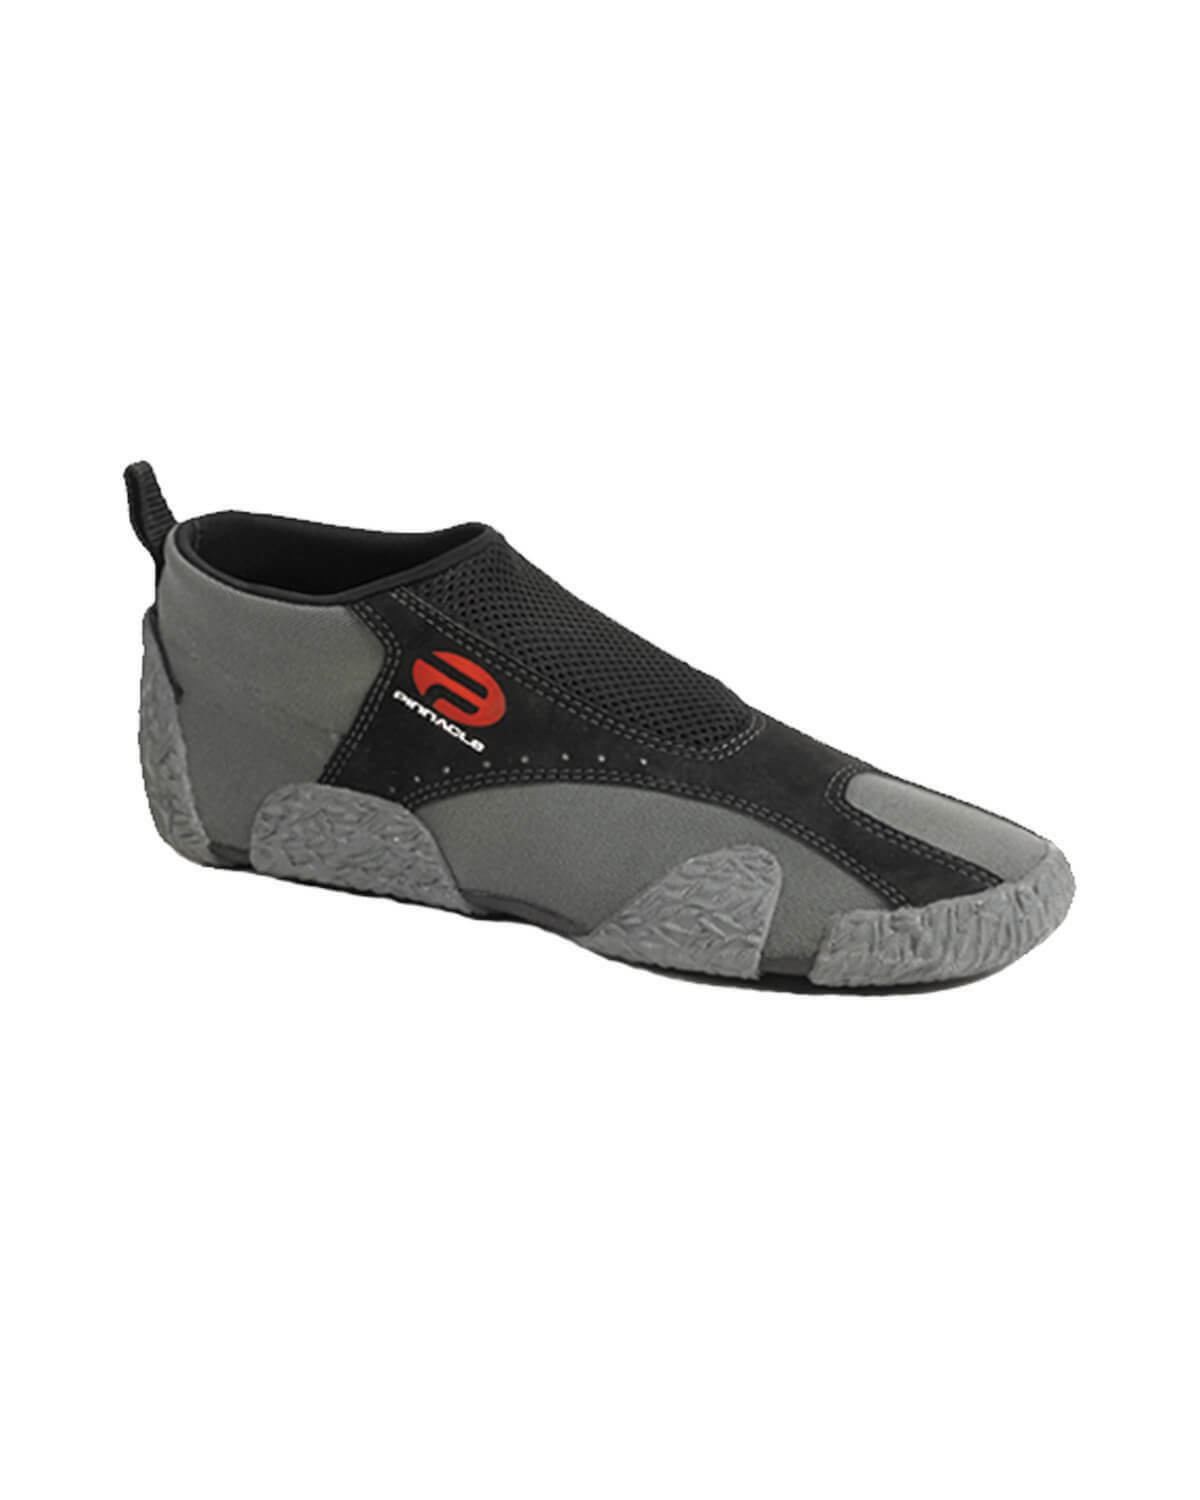 2mm Pinnacle Surf Comber Wetsuit Boots